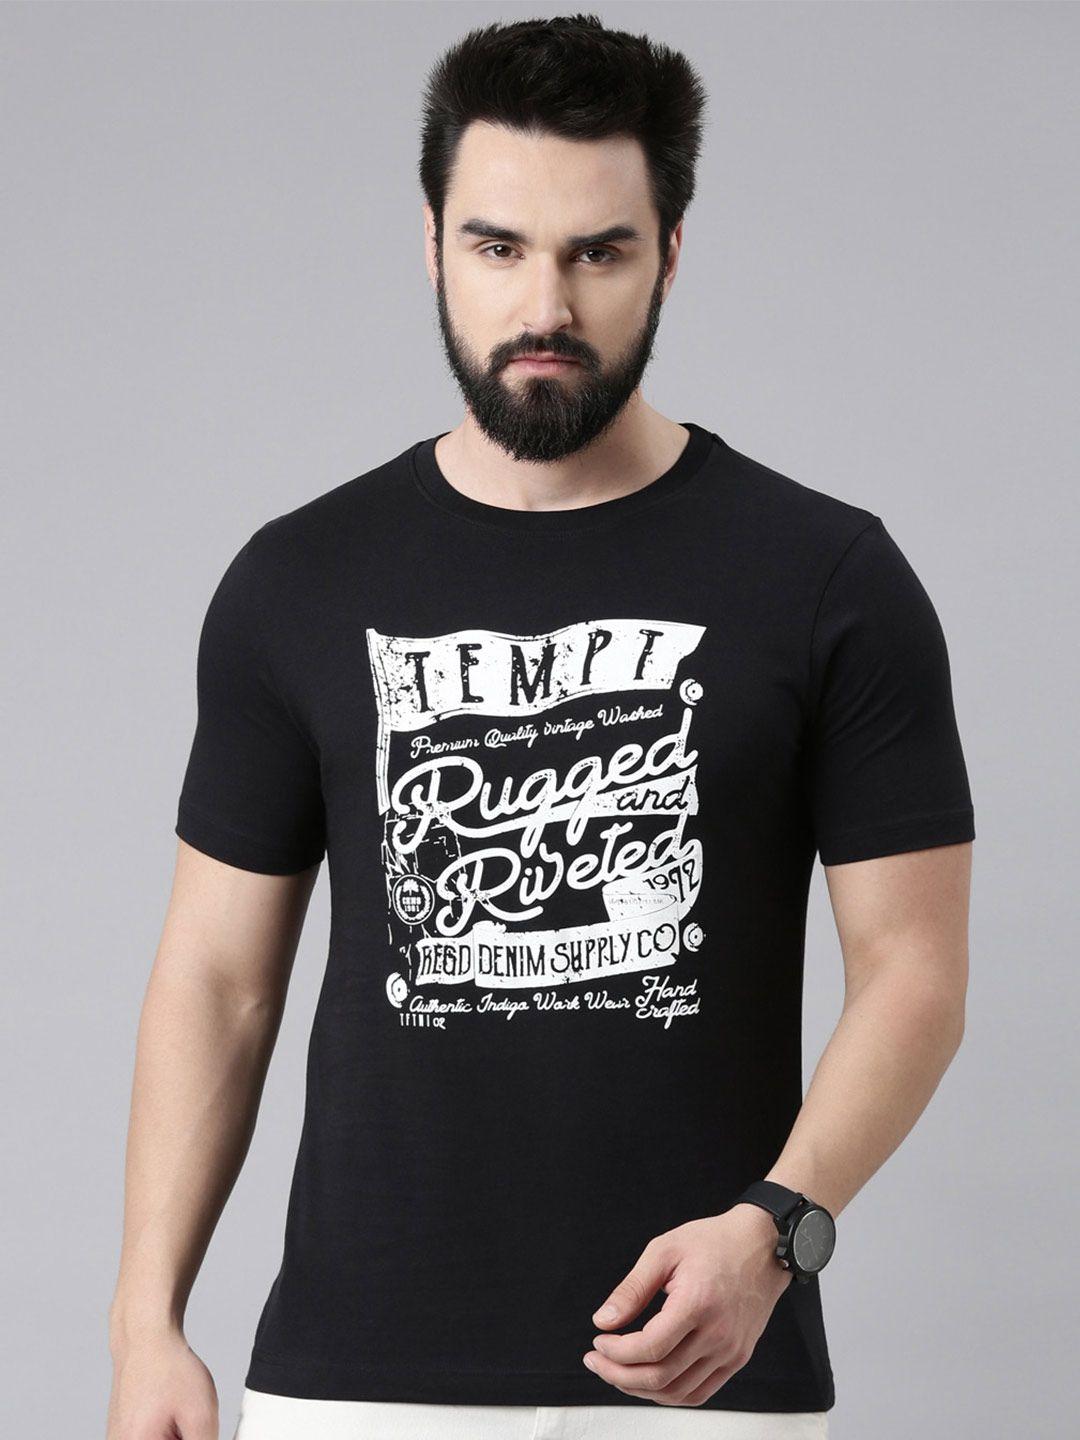 chennistypography printed pure cotton slim fit t-shirt